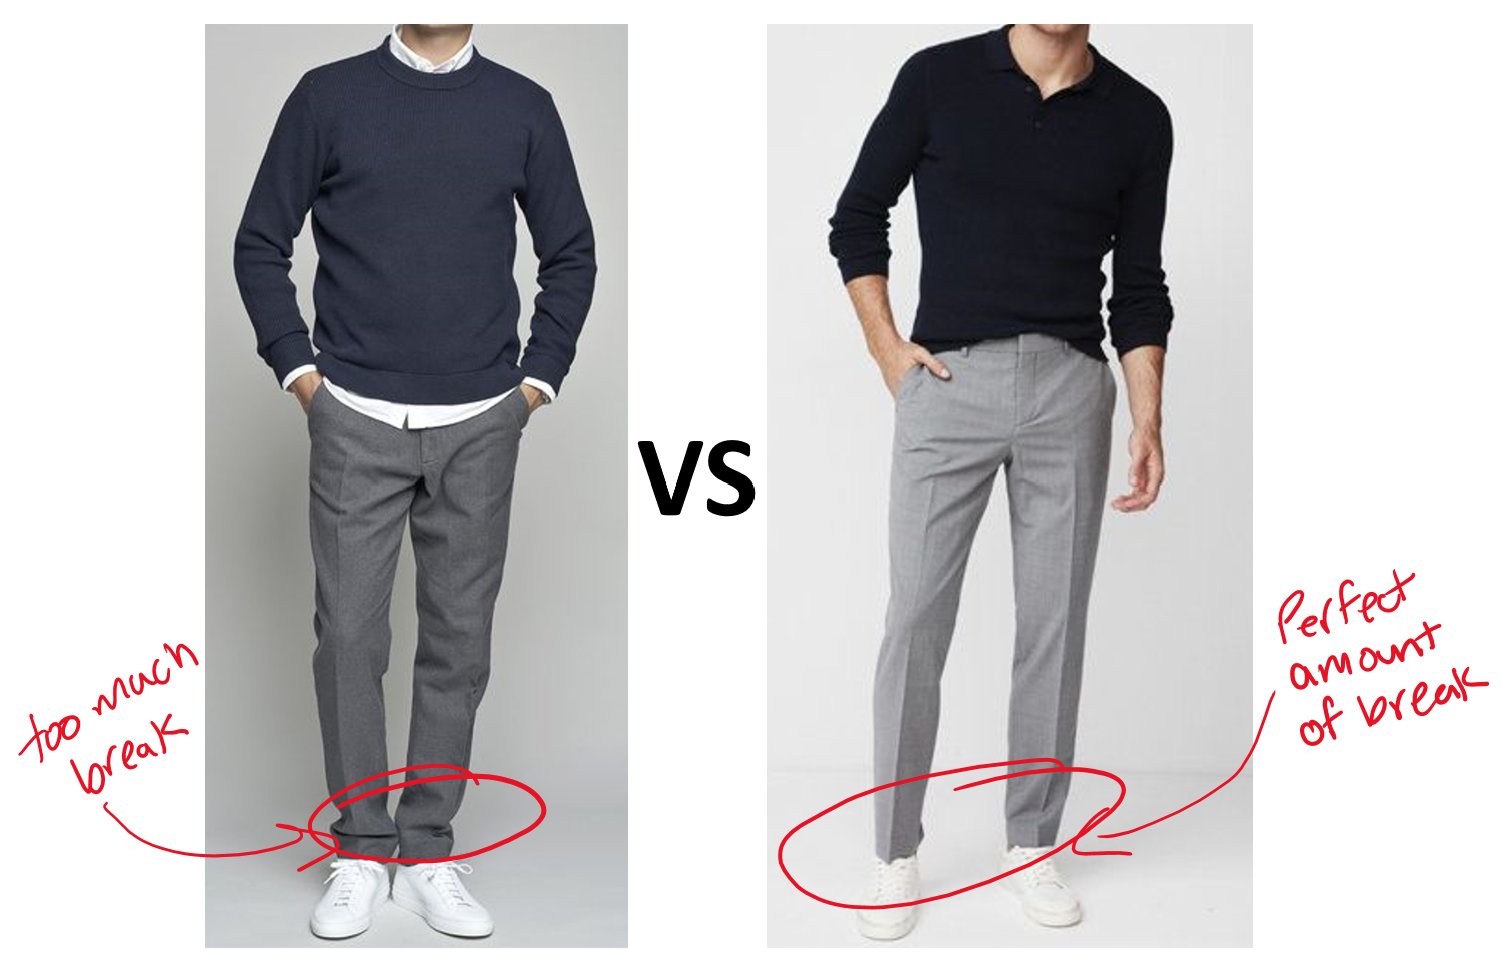 How Pants Should Fit: Dress Pants, Khakis, Jeans, and Shorts Examples